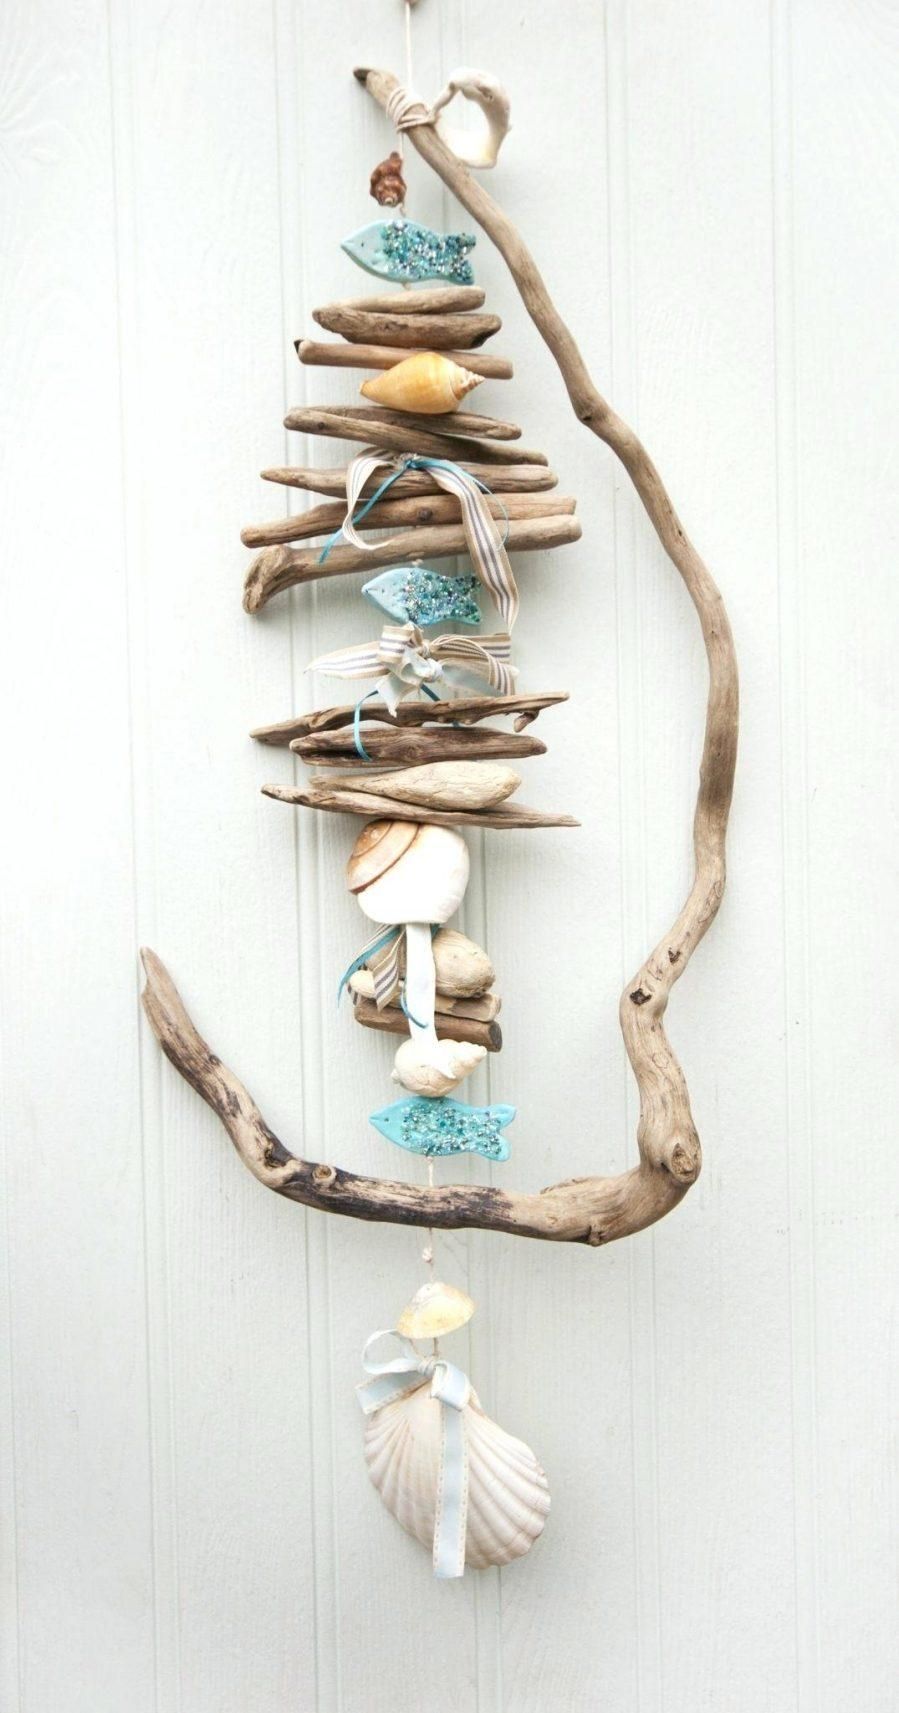 Articles With Driftwood Heart Wall Hanging Tag: Driftwood Wall Regarding Driftwood Heart Wall Art (View 16 of 20)